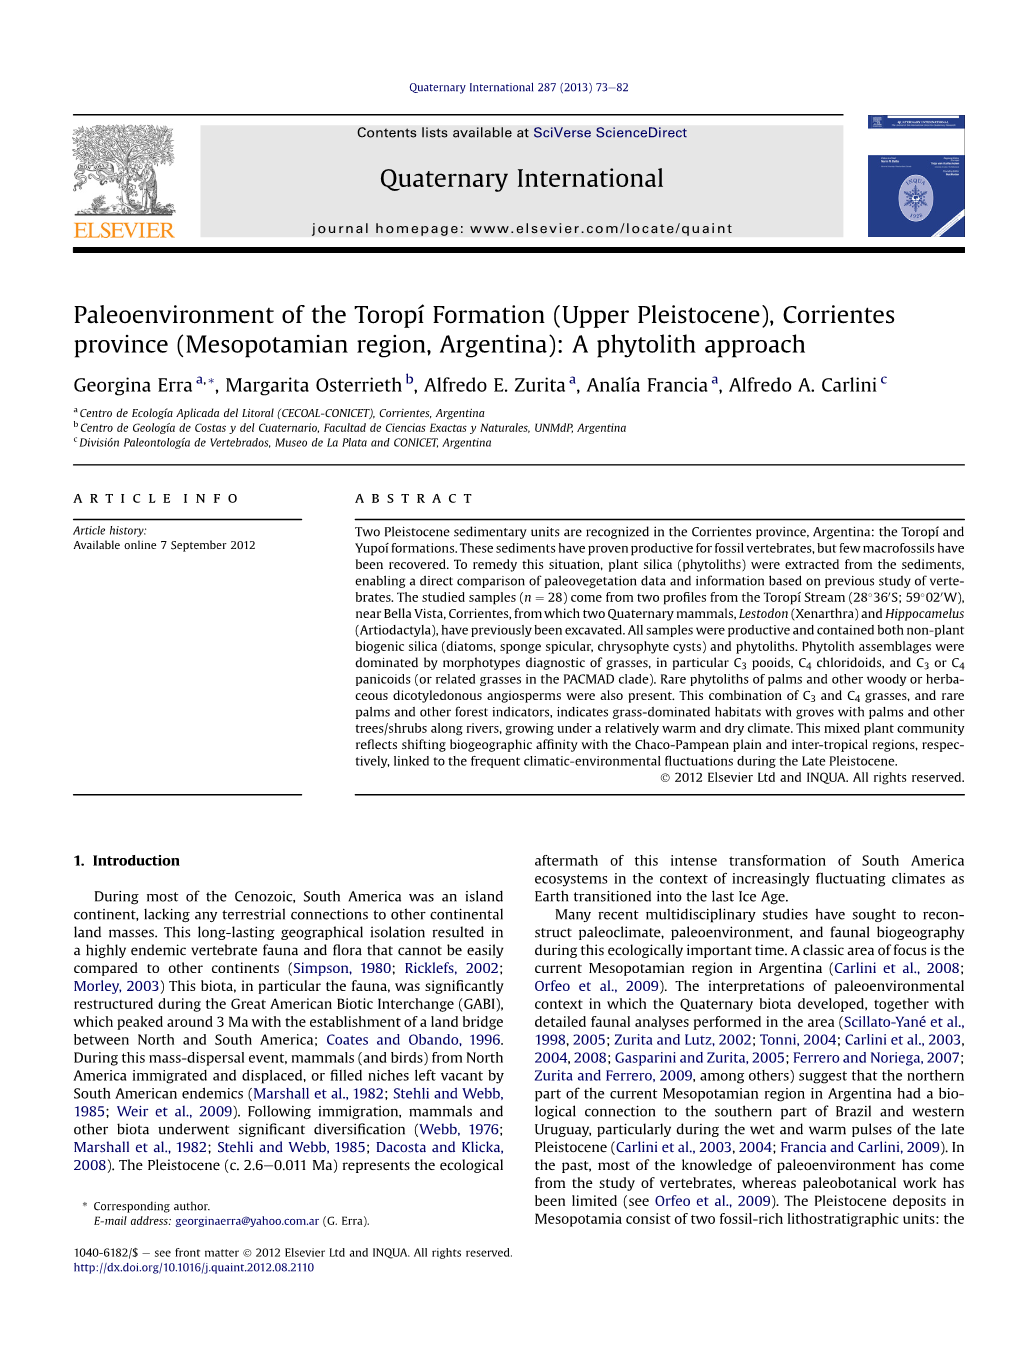 Corrientes Province (Mesopotamian Region, Argentina): a Phytolith Approach